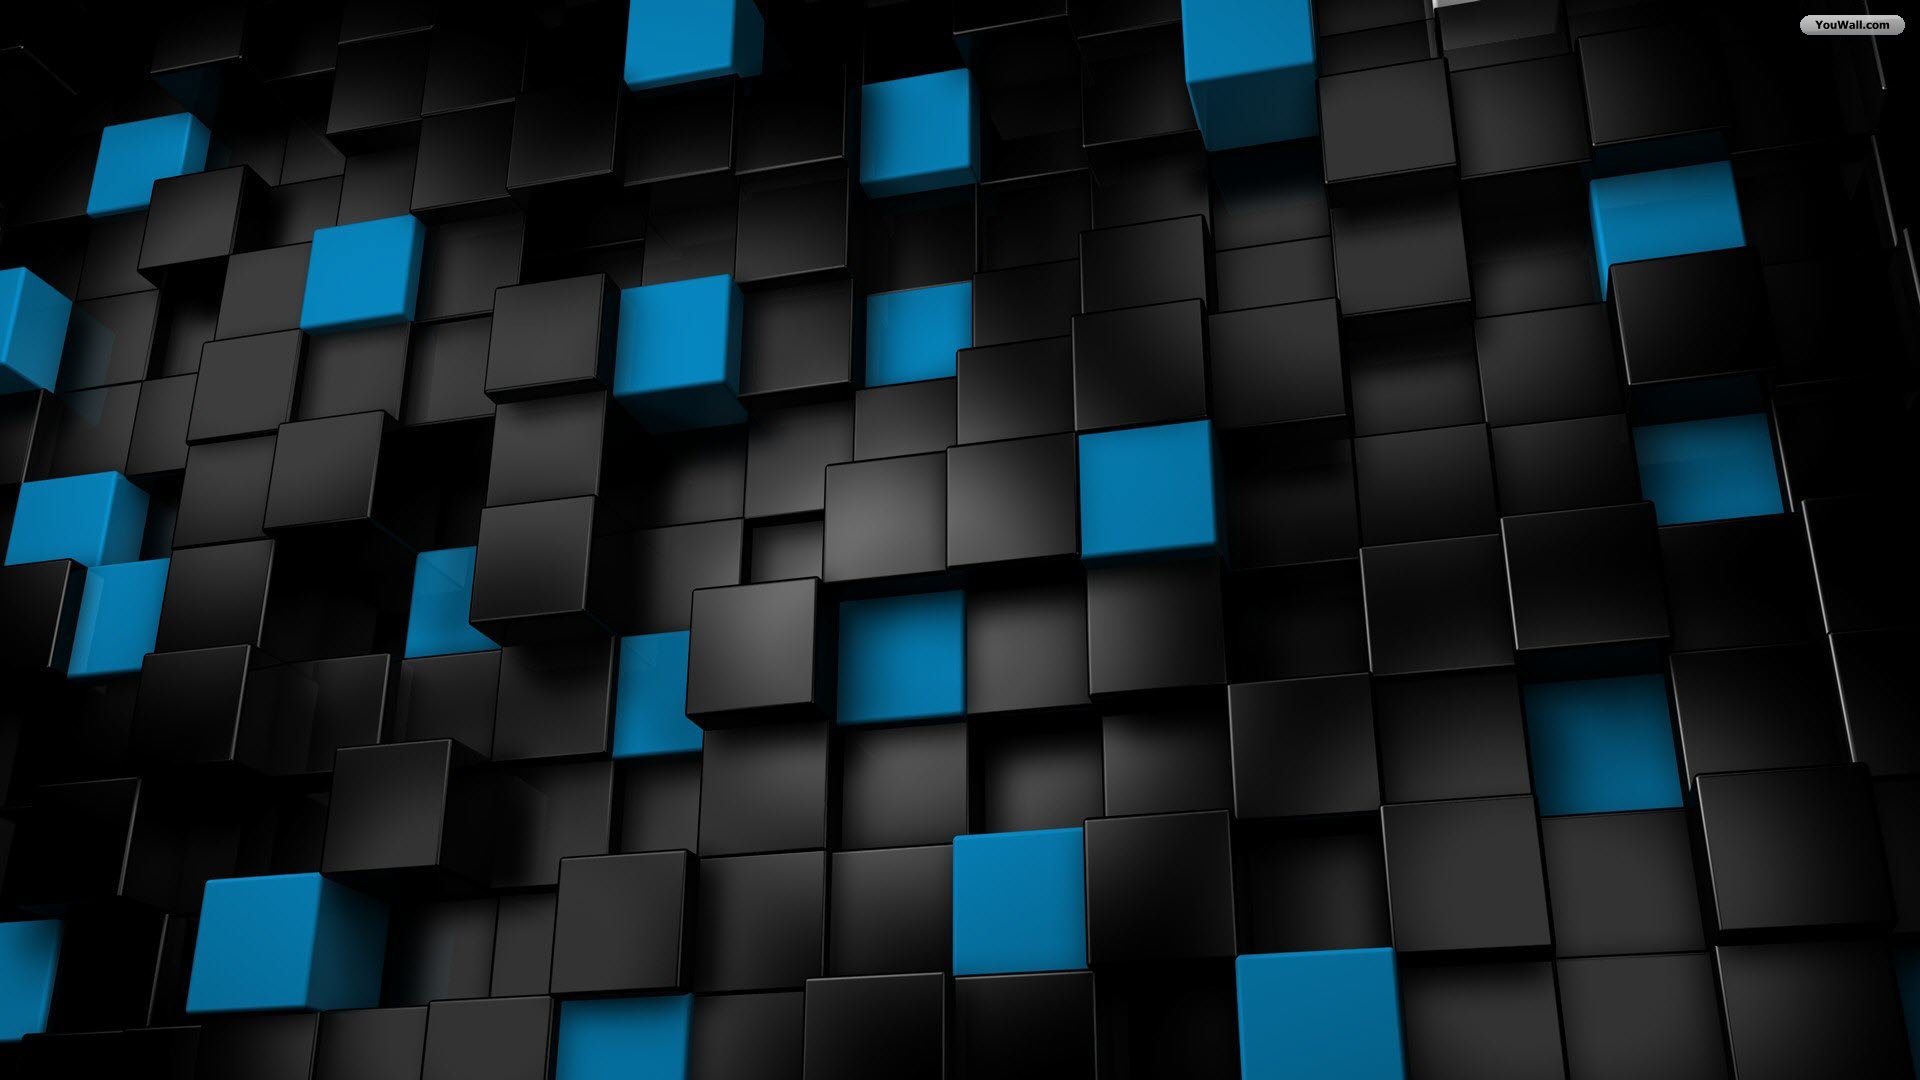 Download Black And Blue Cubes Wallpaper Full HD Wallpapers